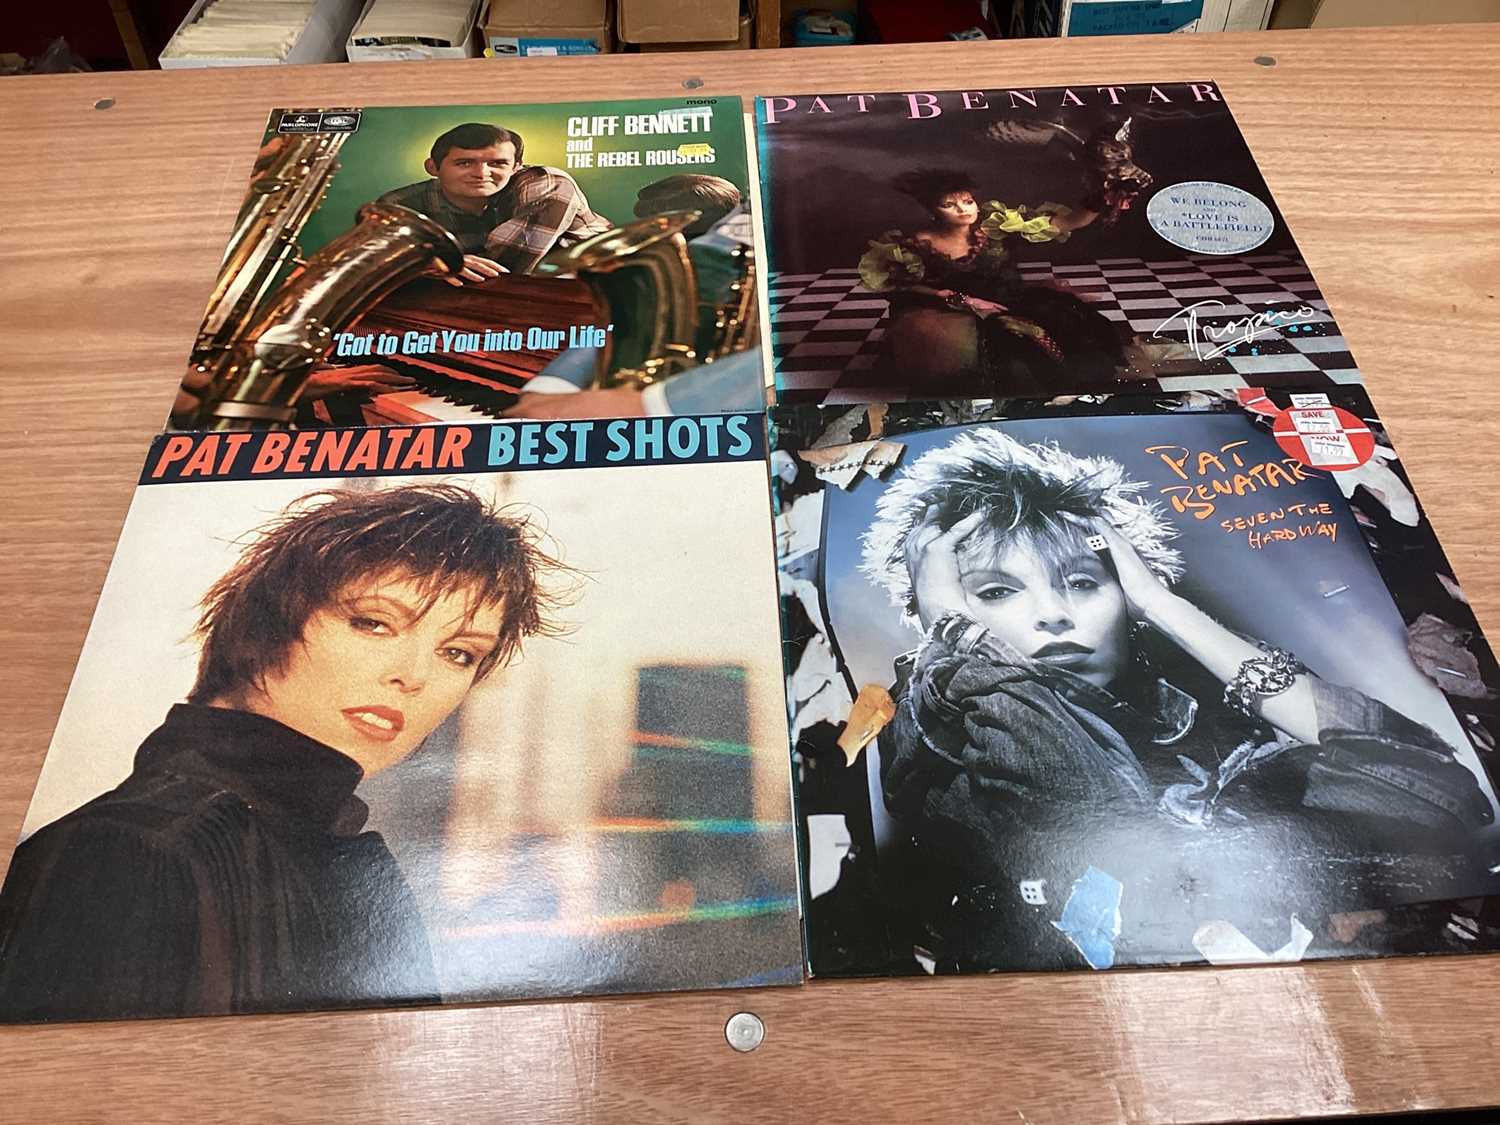 Three retro storage units of LP records including Pat Benatar, Cliff Bennet and the Rebel Rousers, T